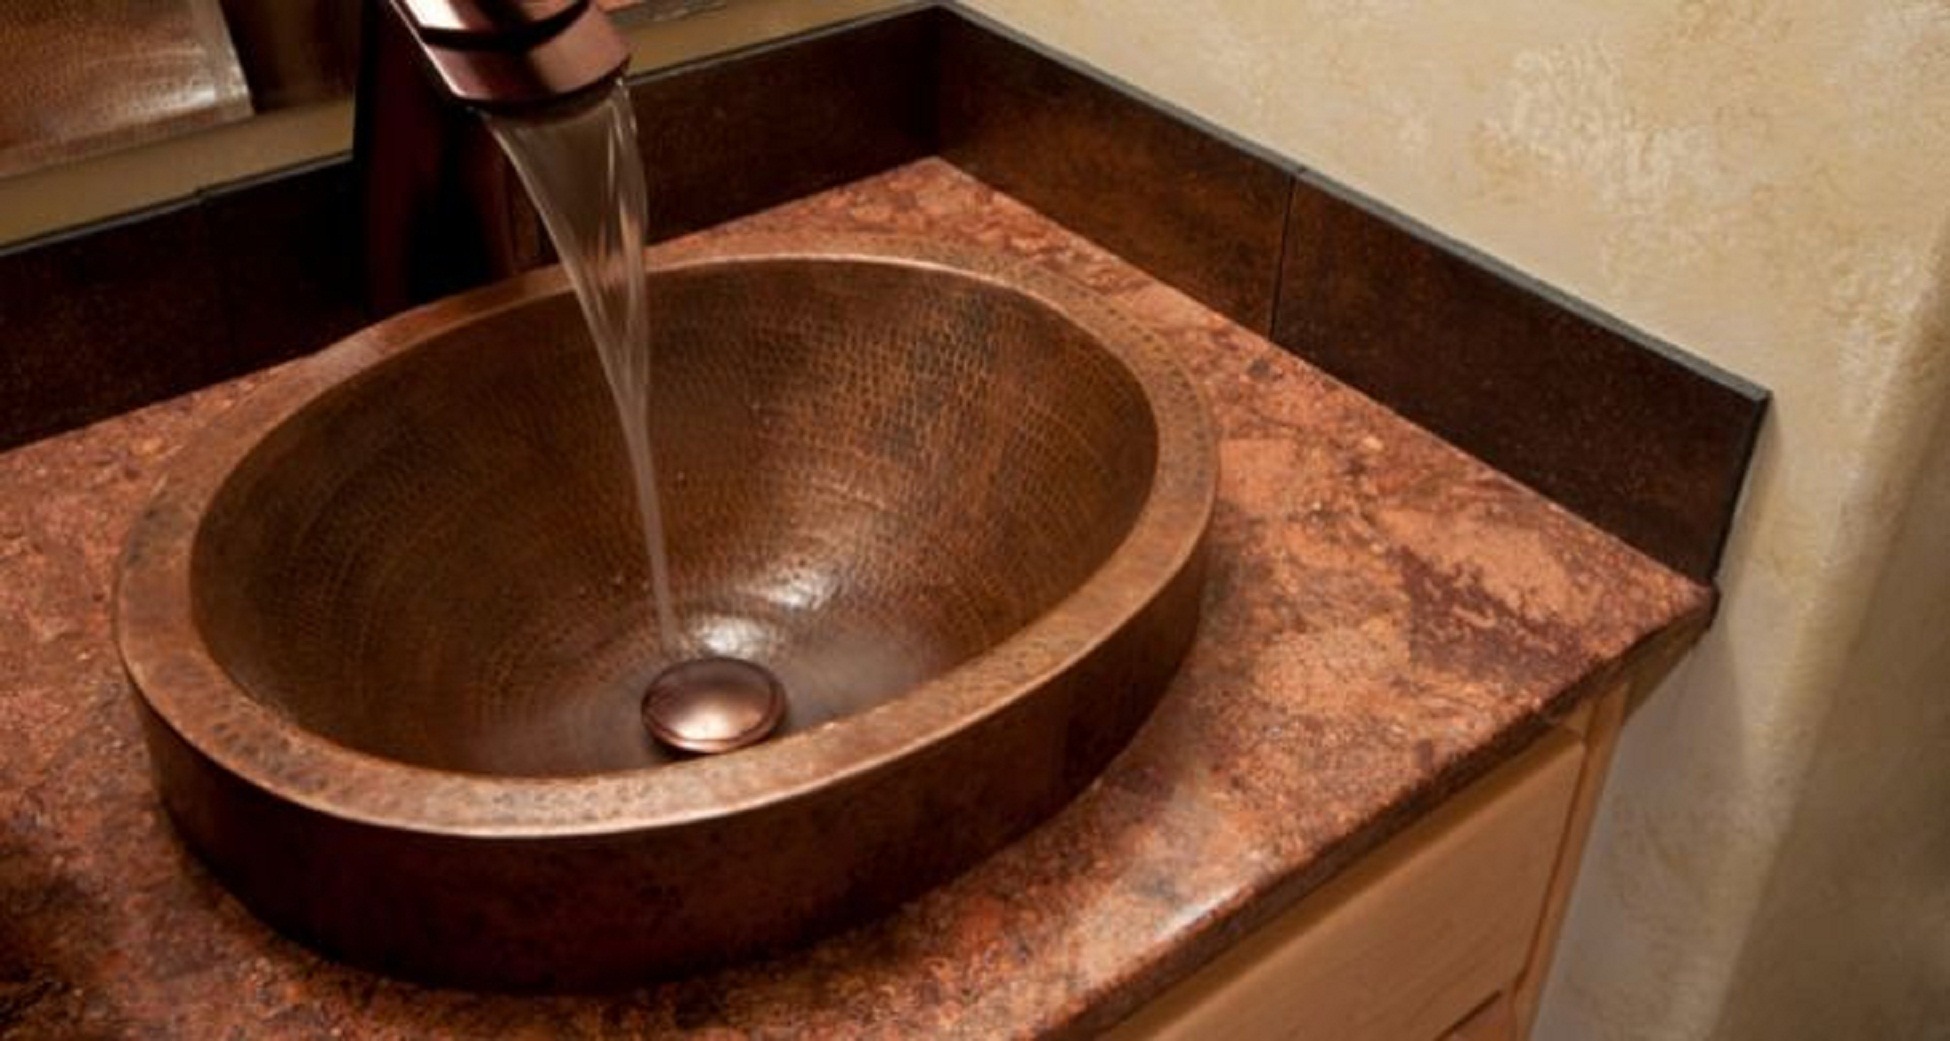 3 Types of Residential Plumbing Services for Tulsa, OK Homeowners